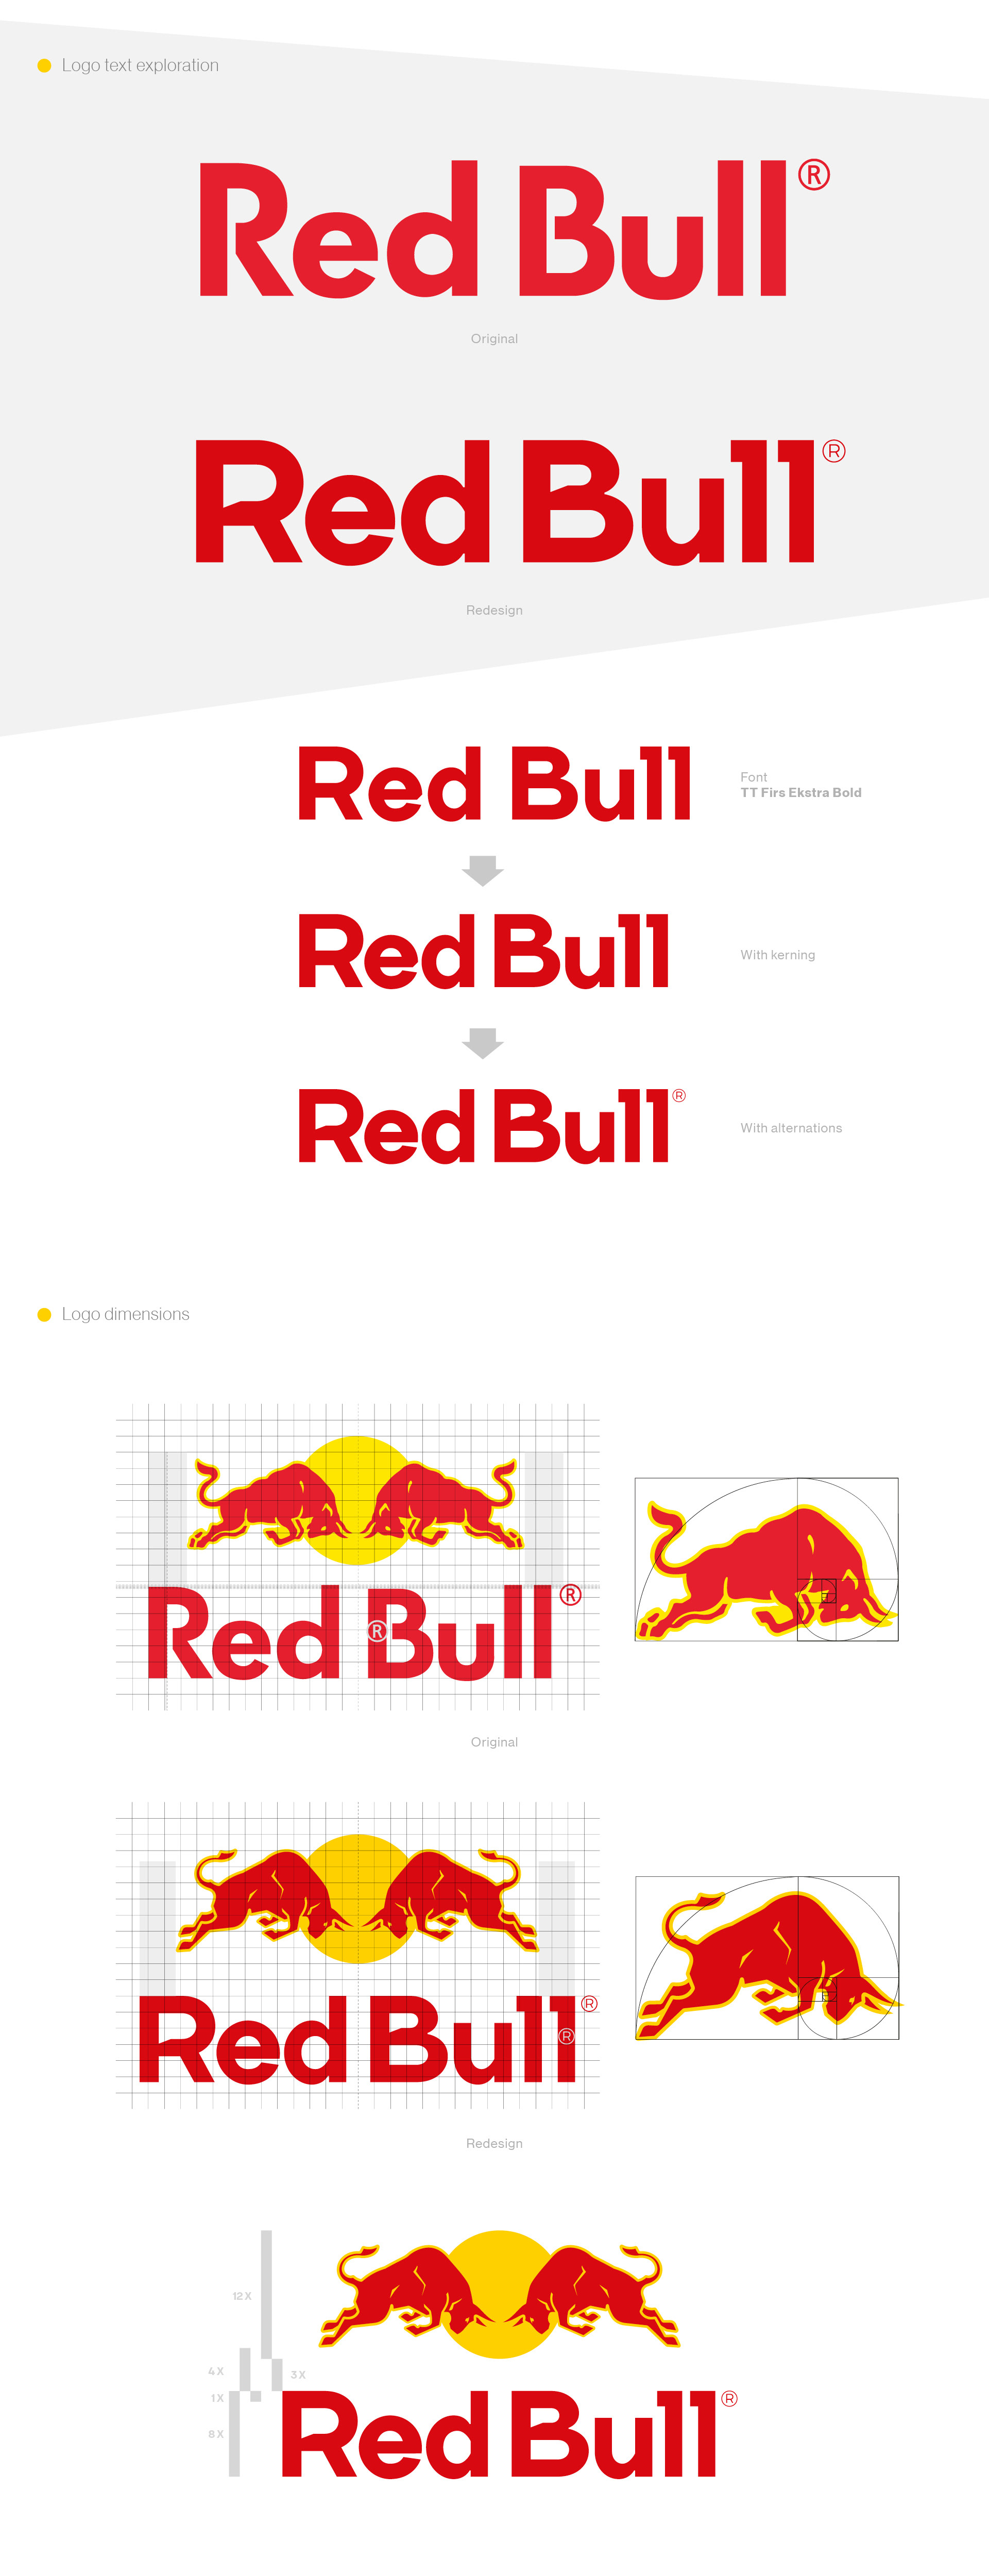 Case Study Red Bull Redesign On Behance